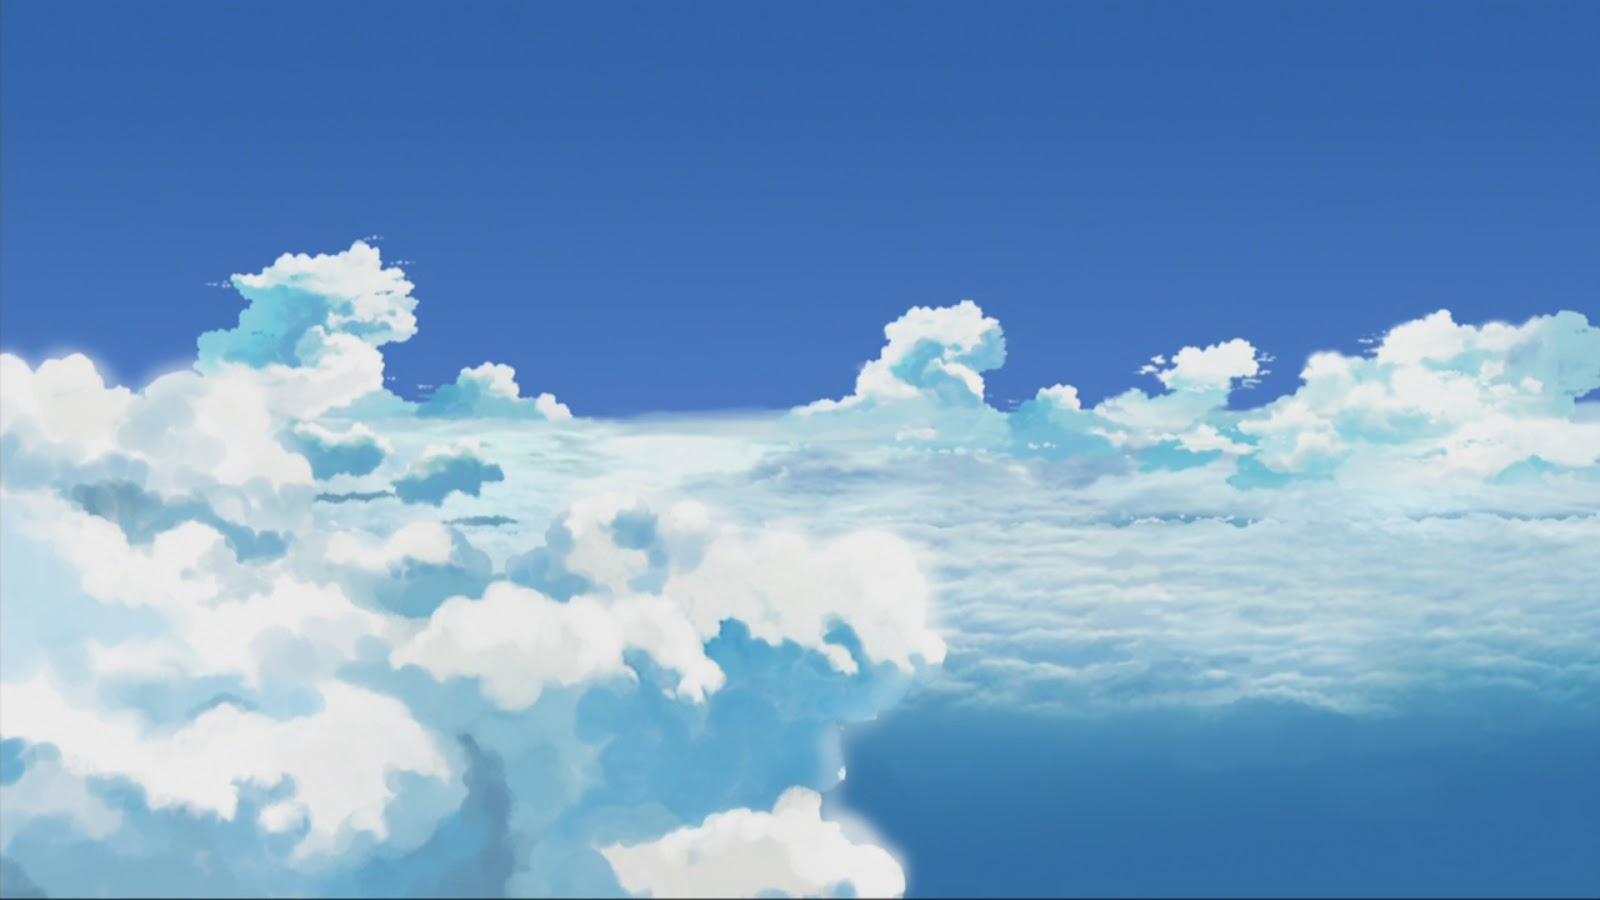 Sky Anime Scenery Wallpapers - Wallpaper Cave